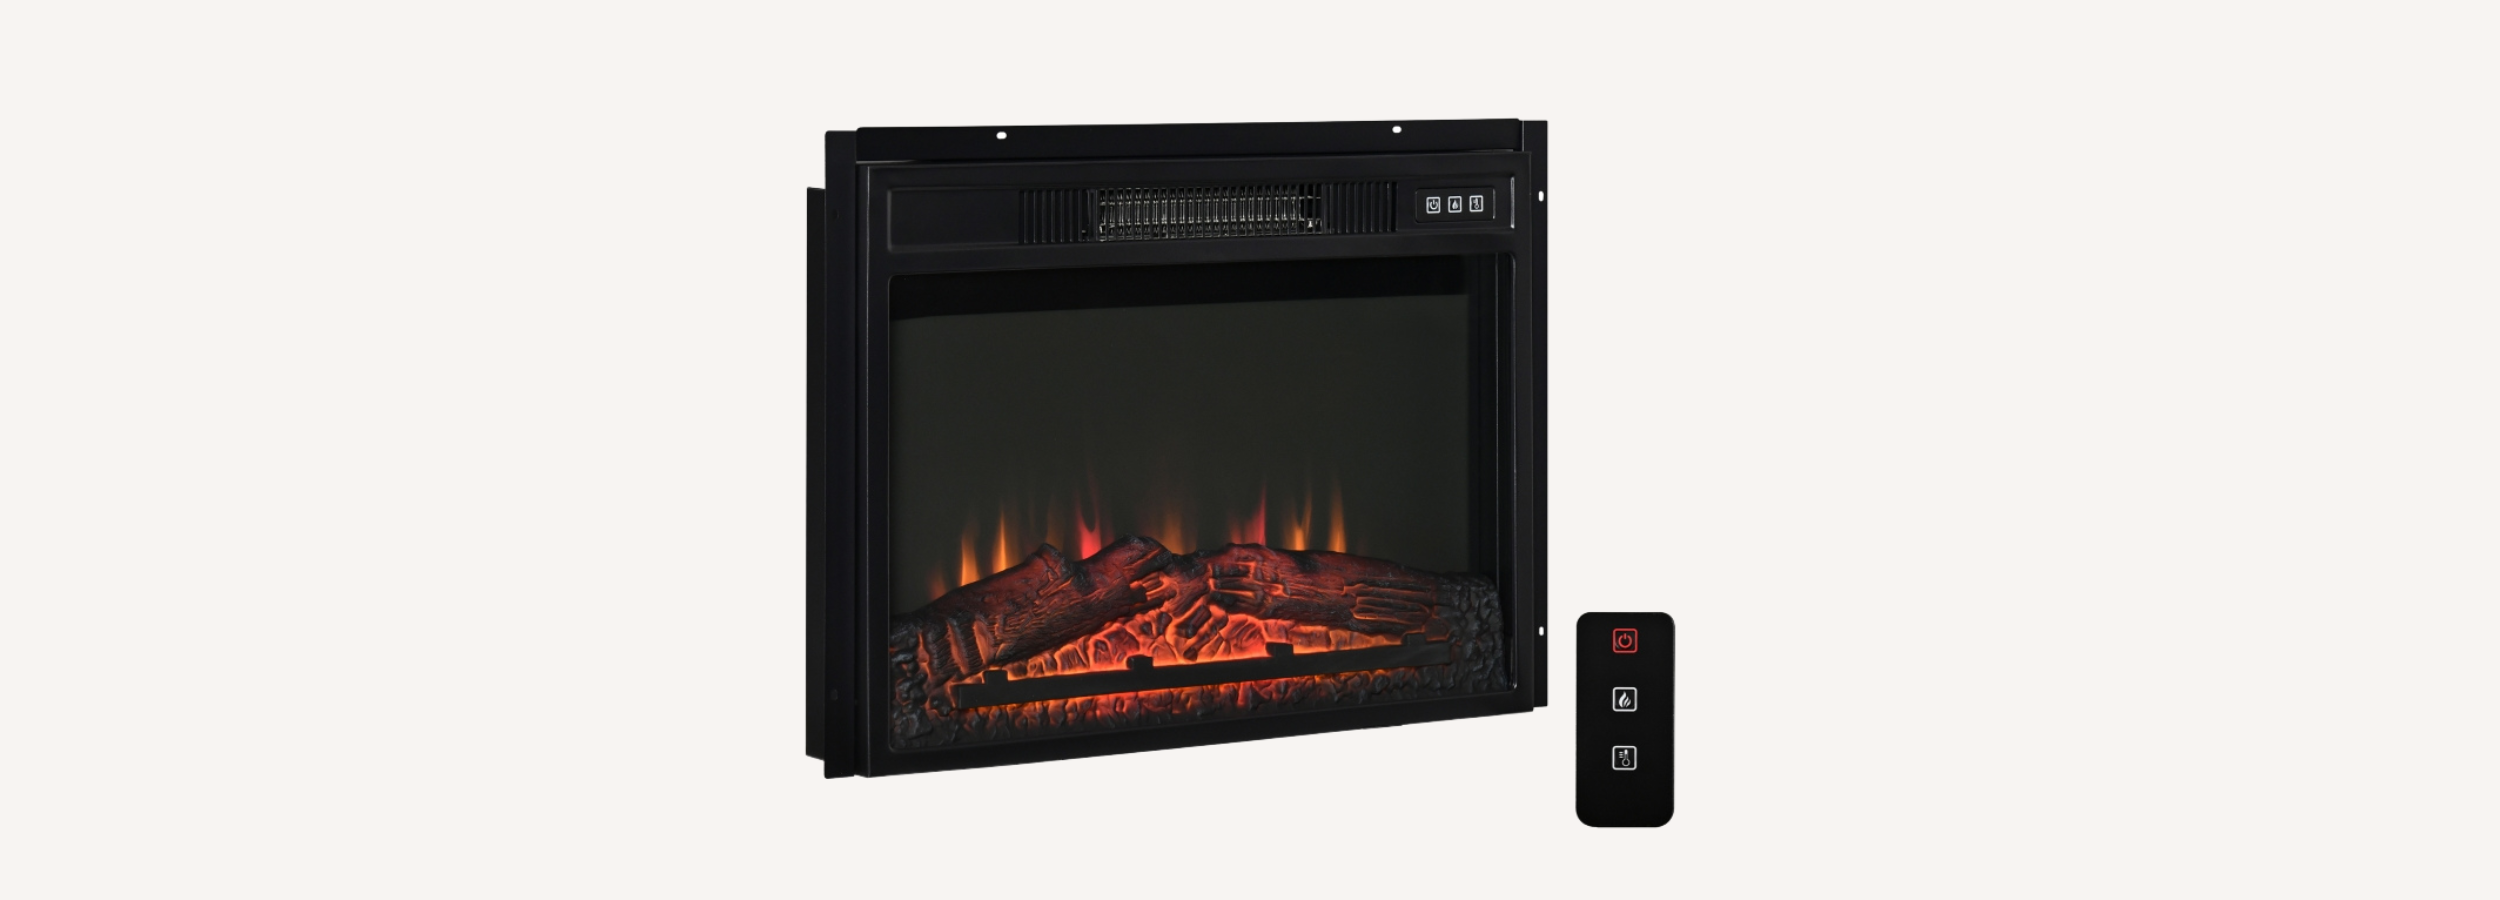 fireplace inserts on sale today 